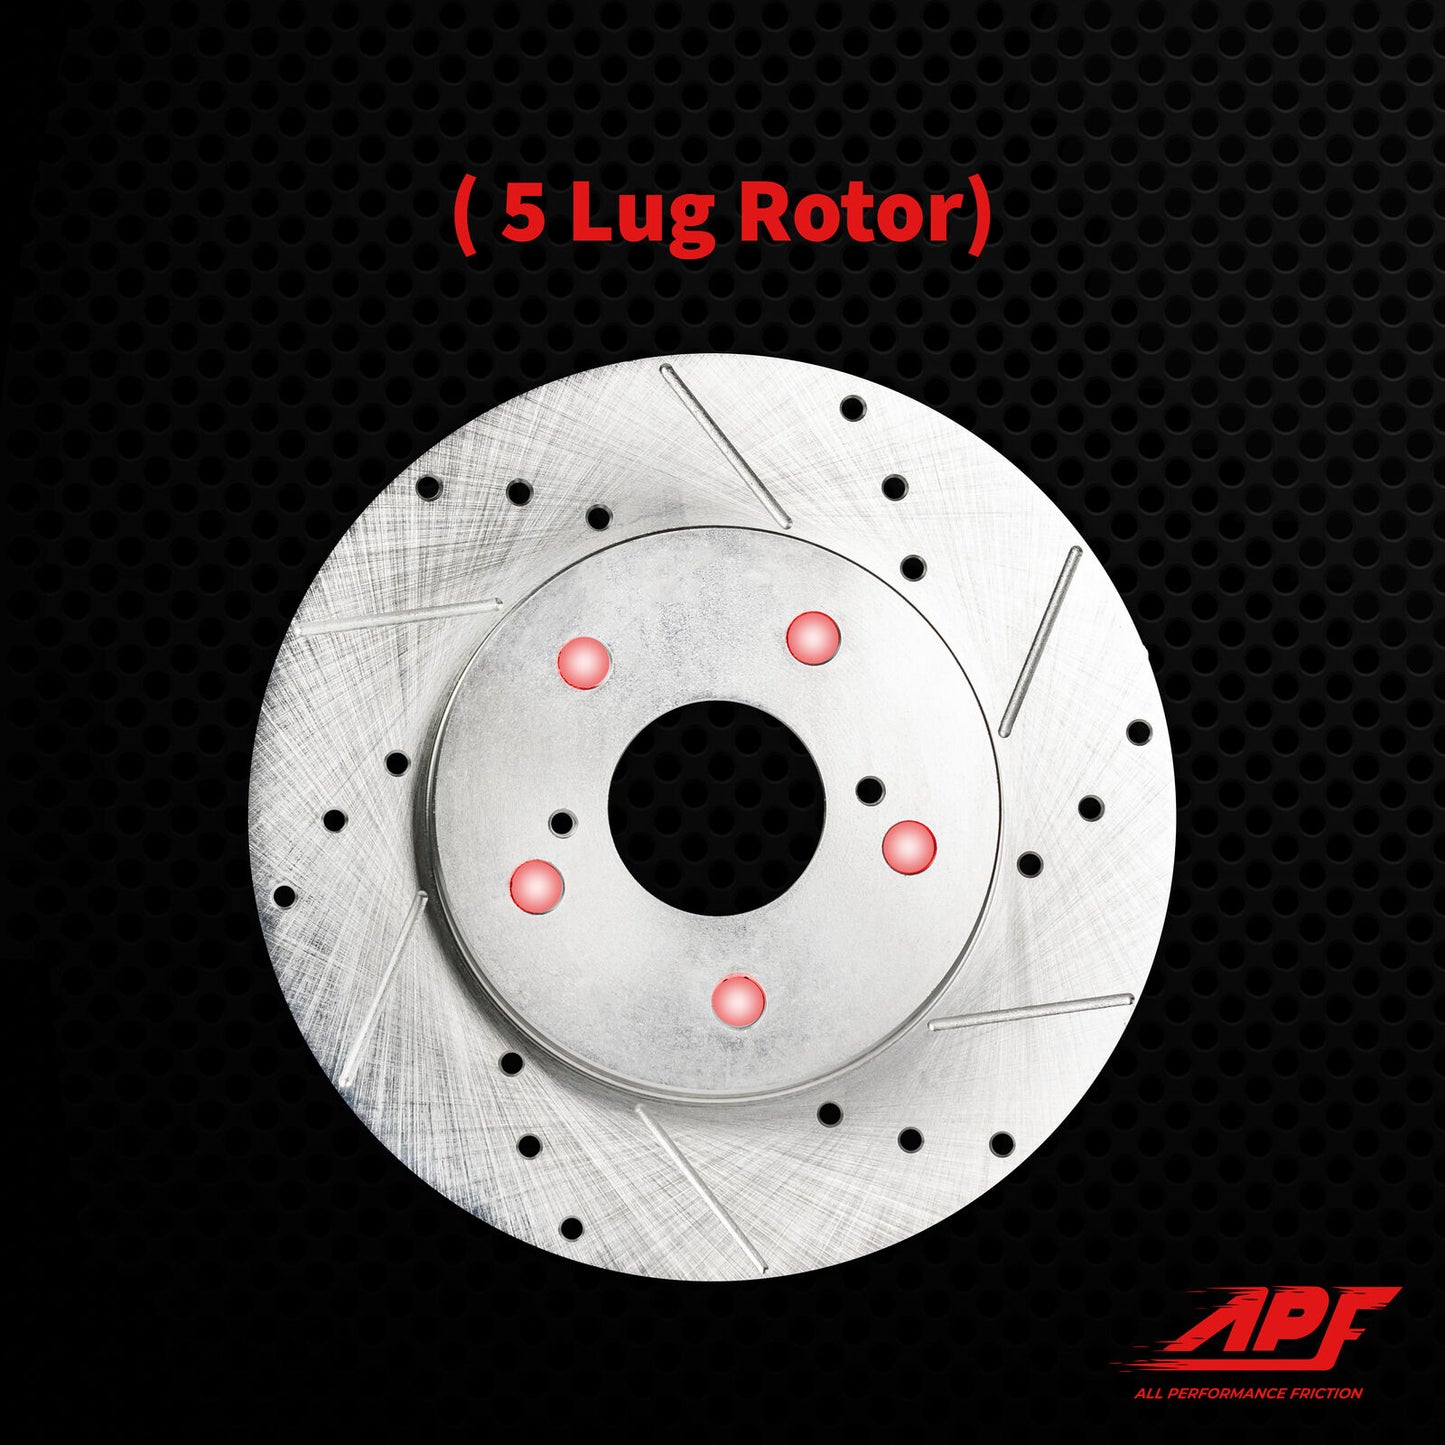 APF All Performance Friction Front Rotors compatible with Lincoln Mark VIII 1995-1998 Zinc Drilled Slotted Rotors | $140.74